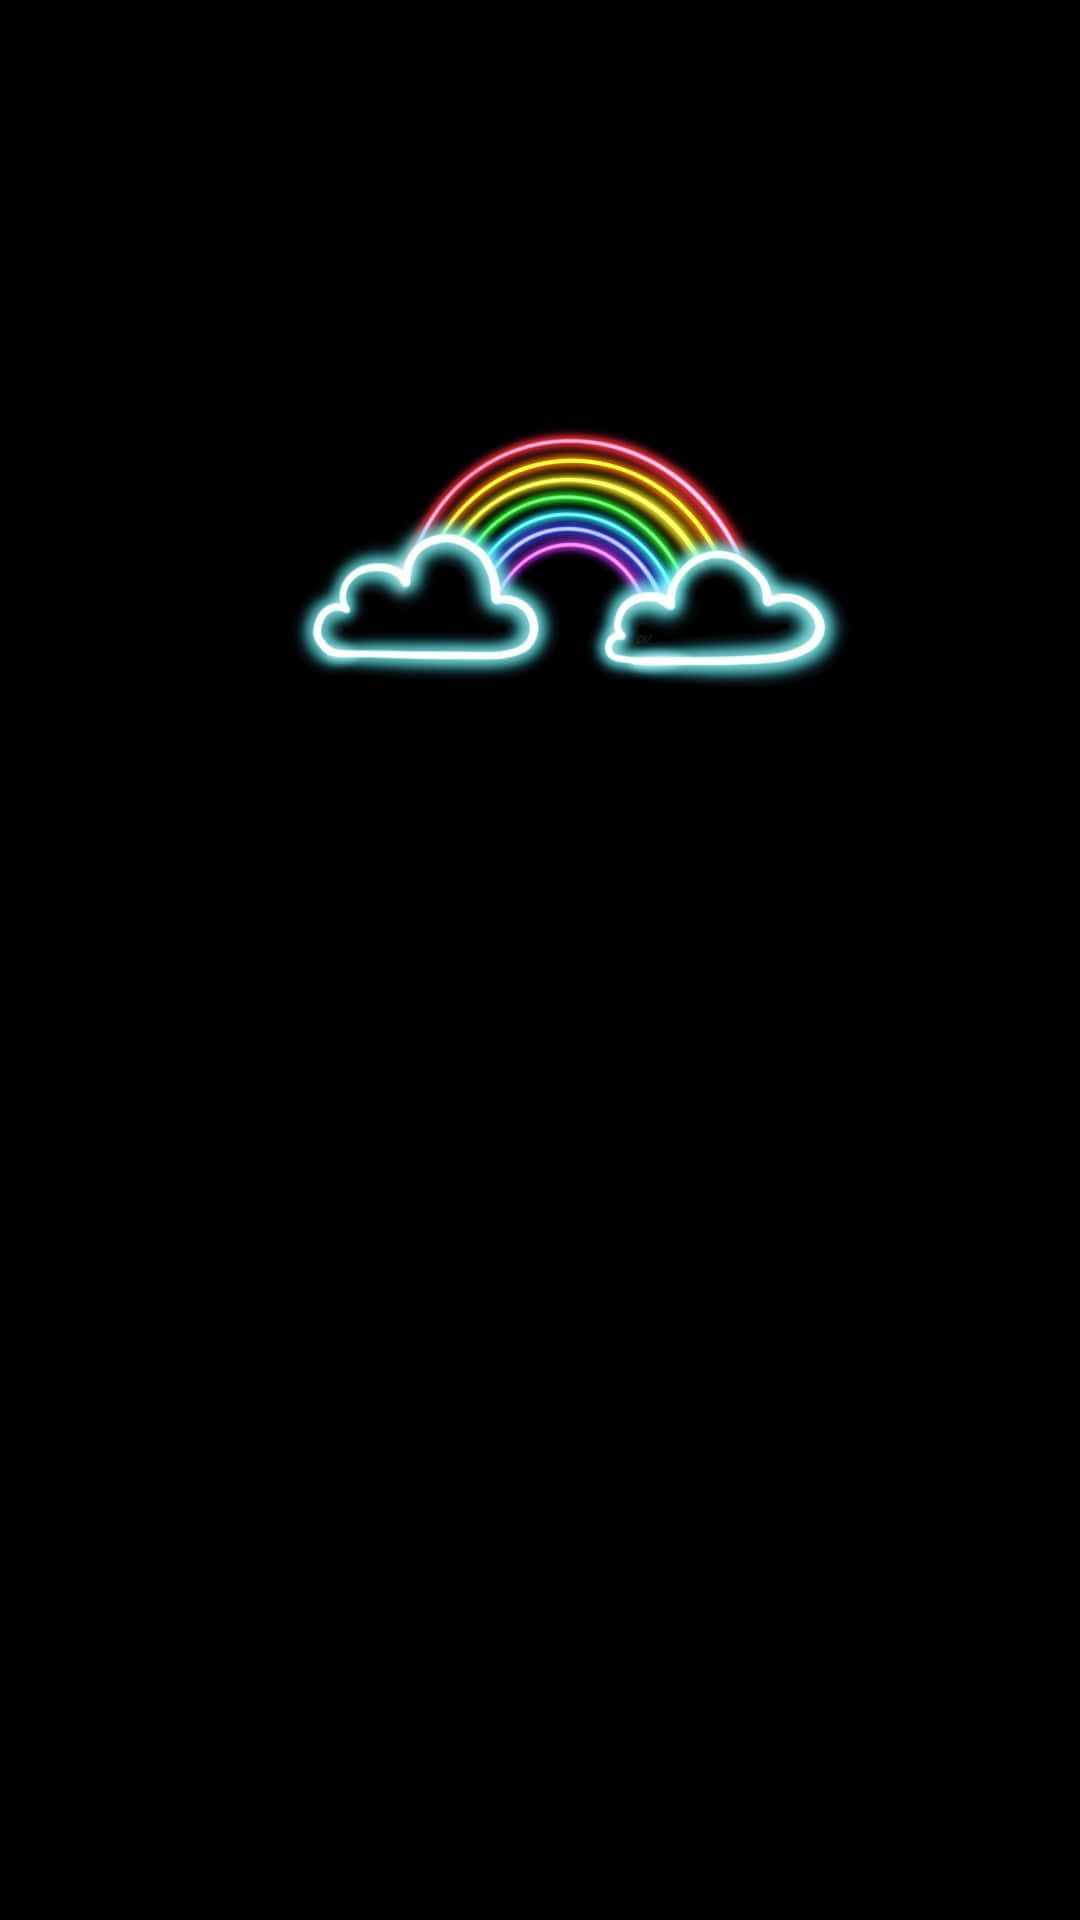 A stunning Black Rainbow Colorfully Decorates the Sky Wallpaper